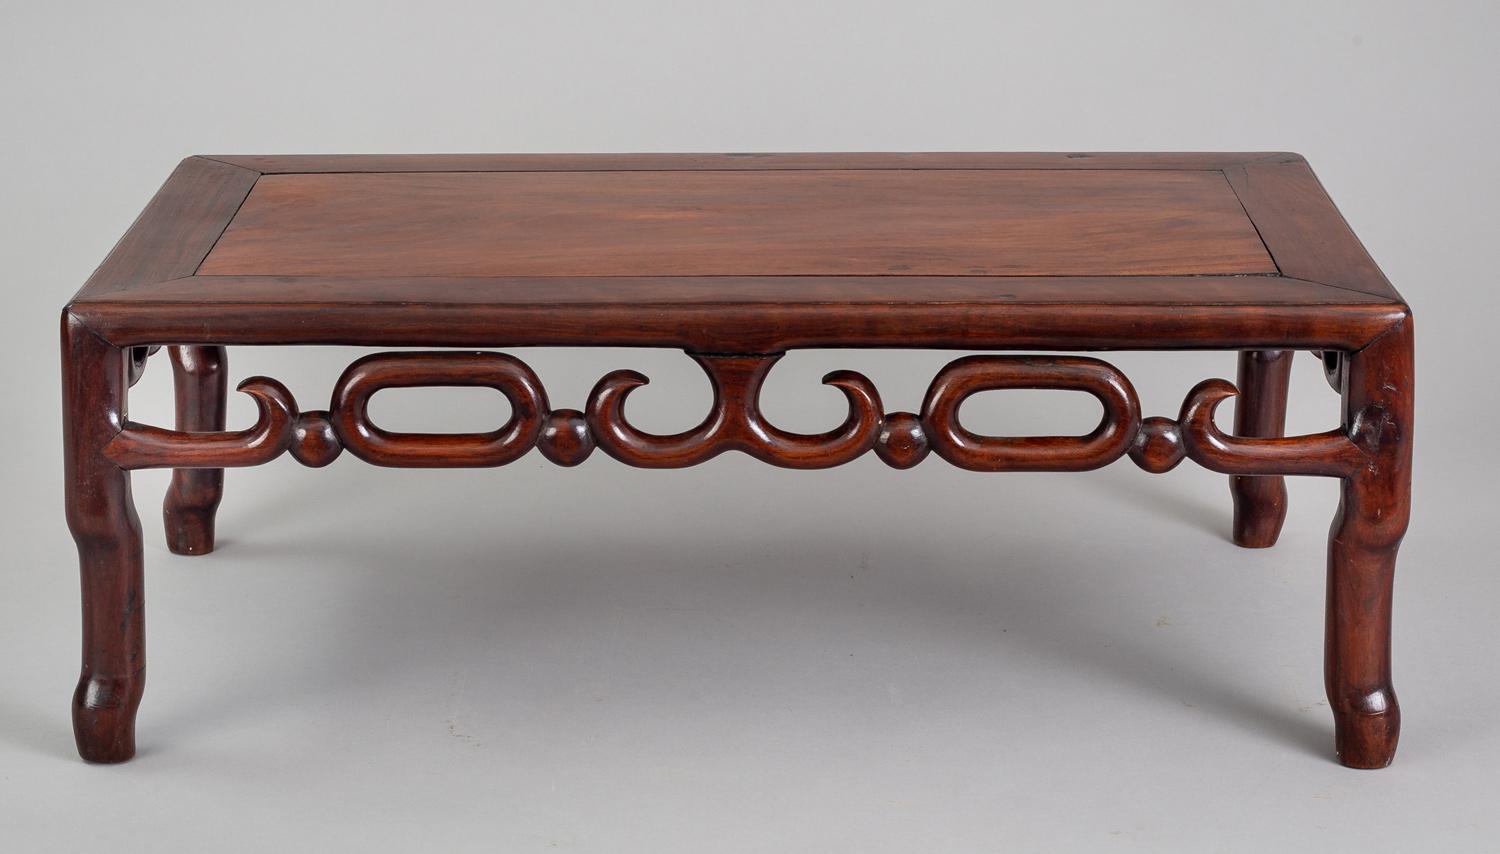 Chinese hardwood low table with a paneled top within a mitered frame, an openwork apron of linked C-scroll and oval 0 carvings joined by small spheres, raised on four shaped rounded legs.